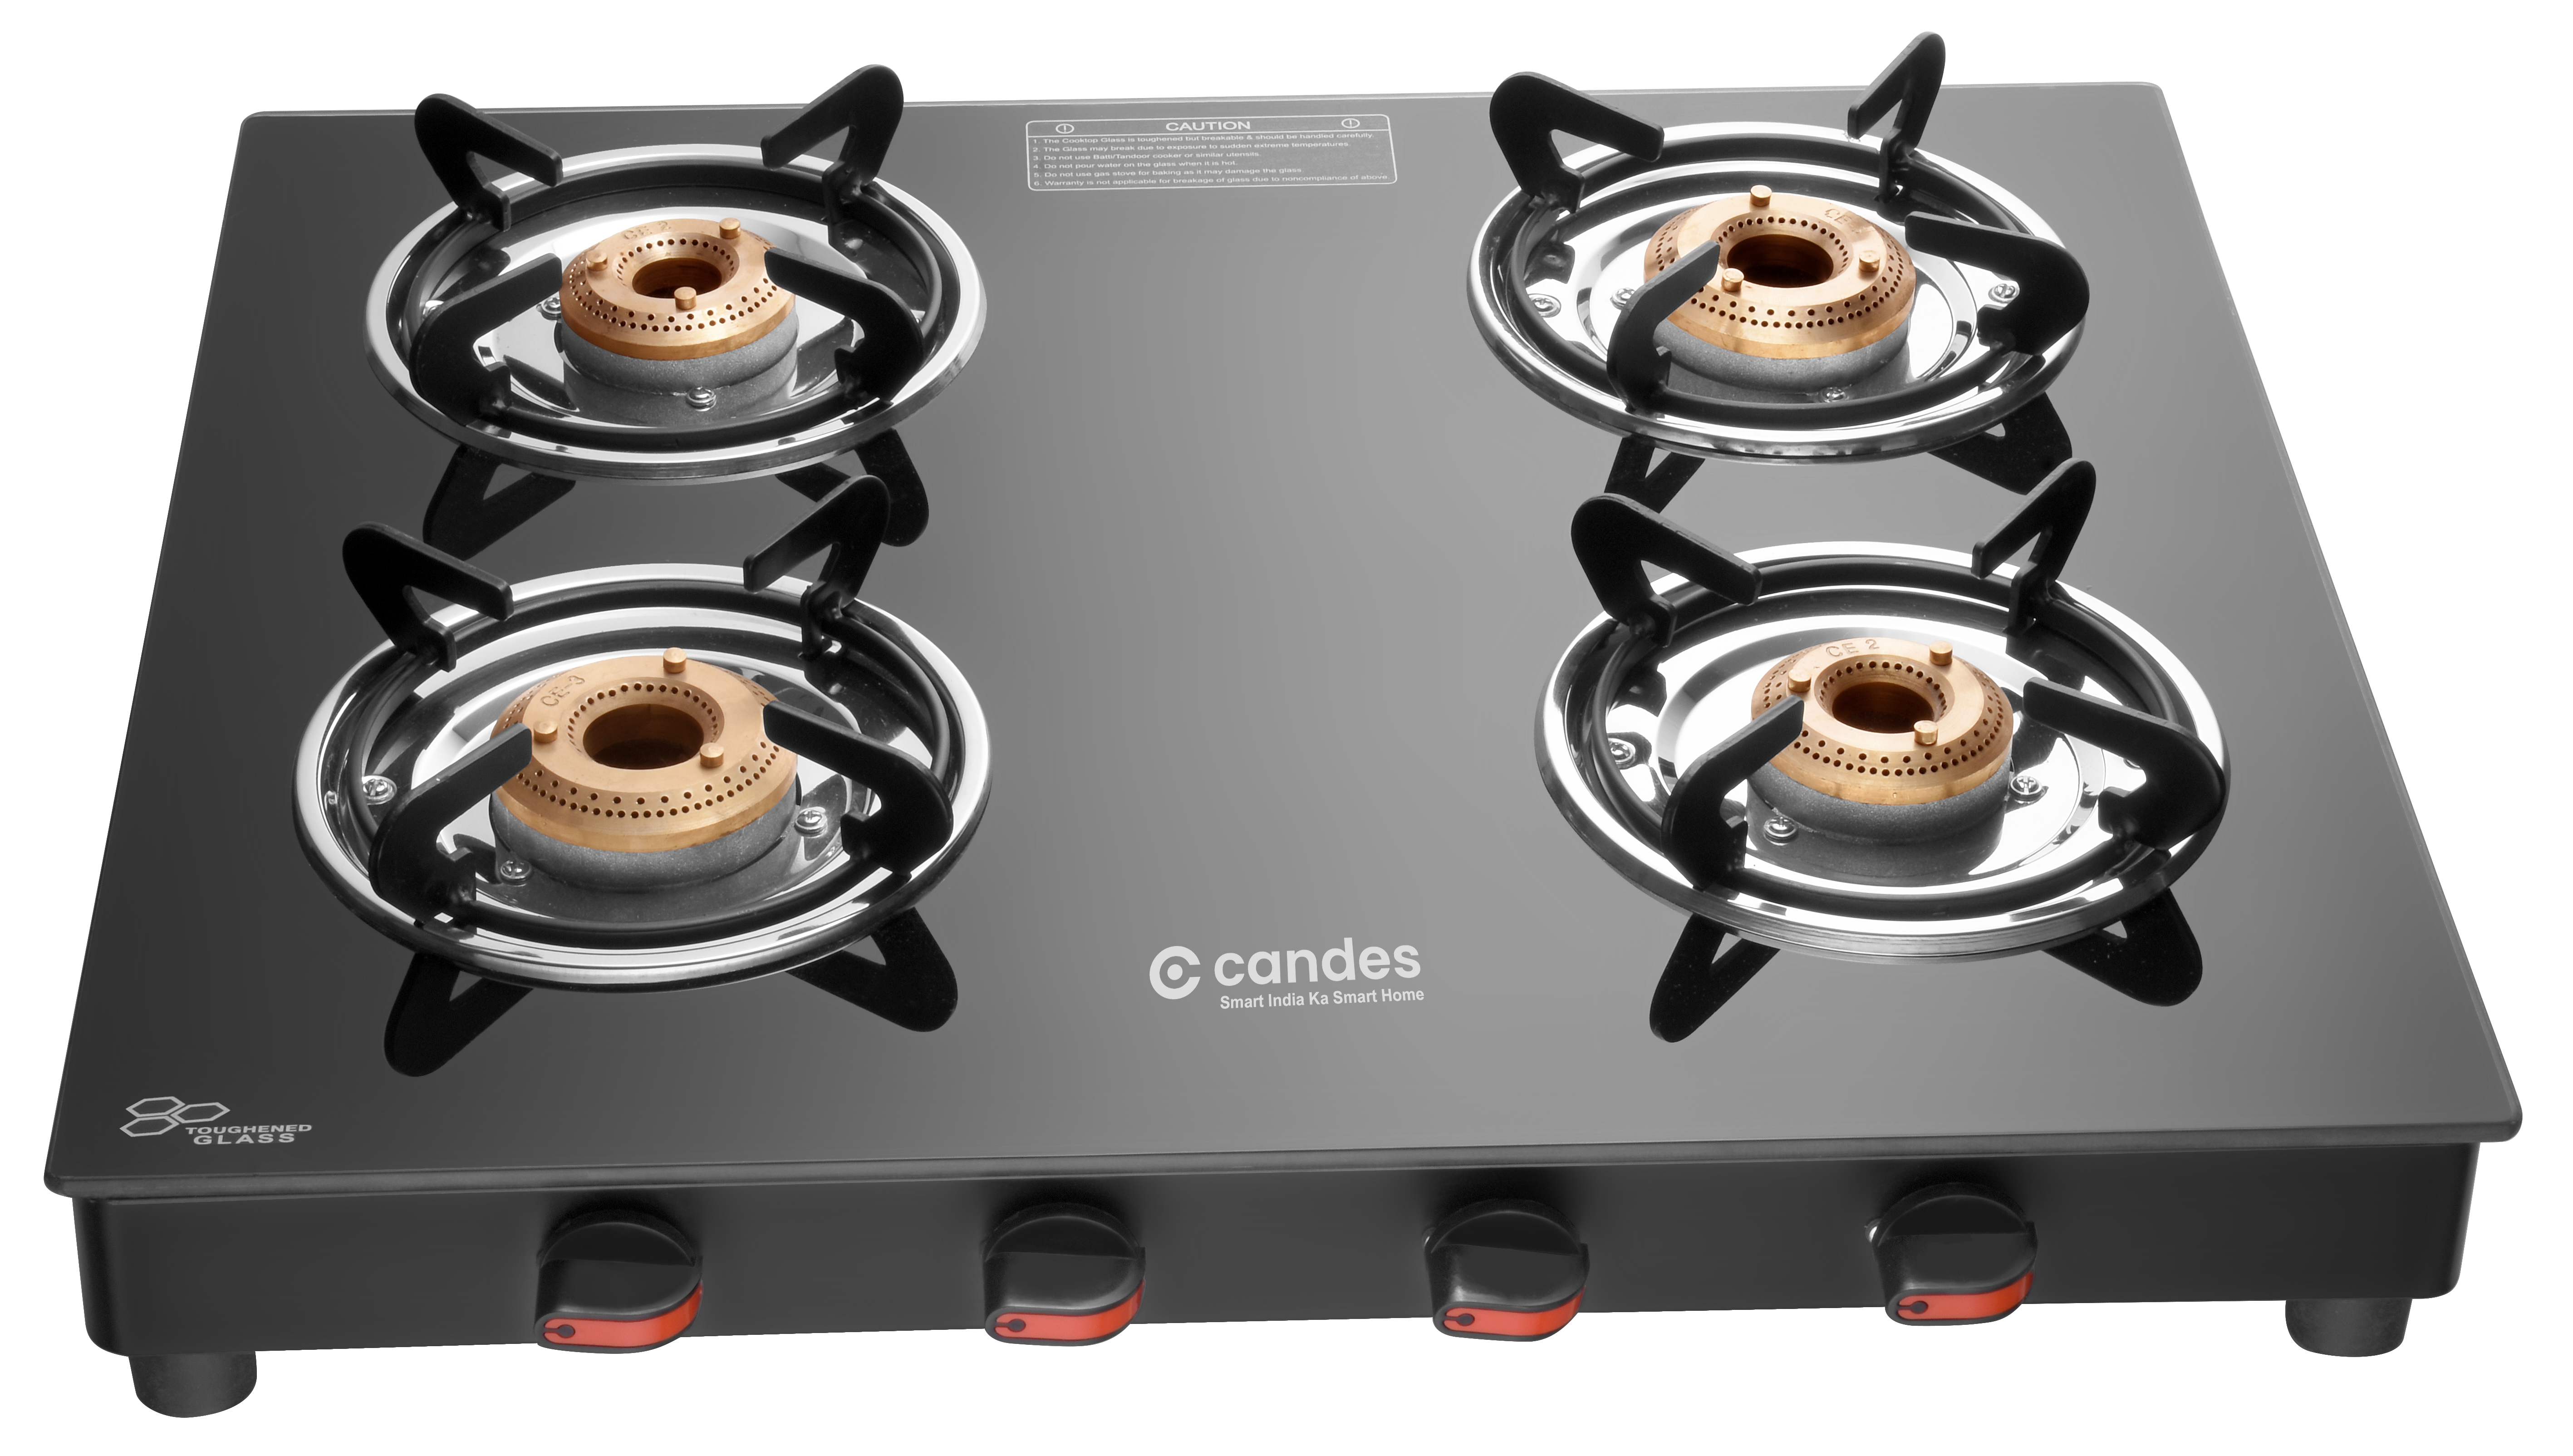 Candes Magma Glass Top 4 Burner Gas Stove